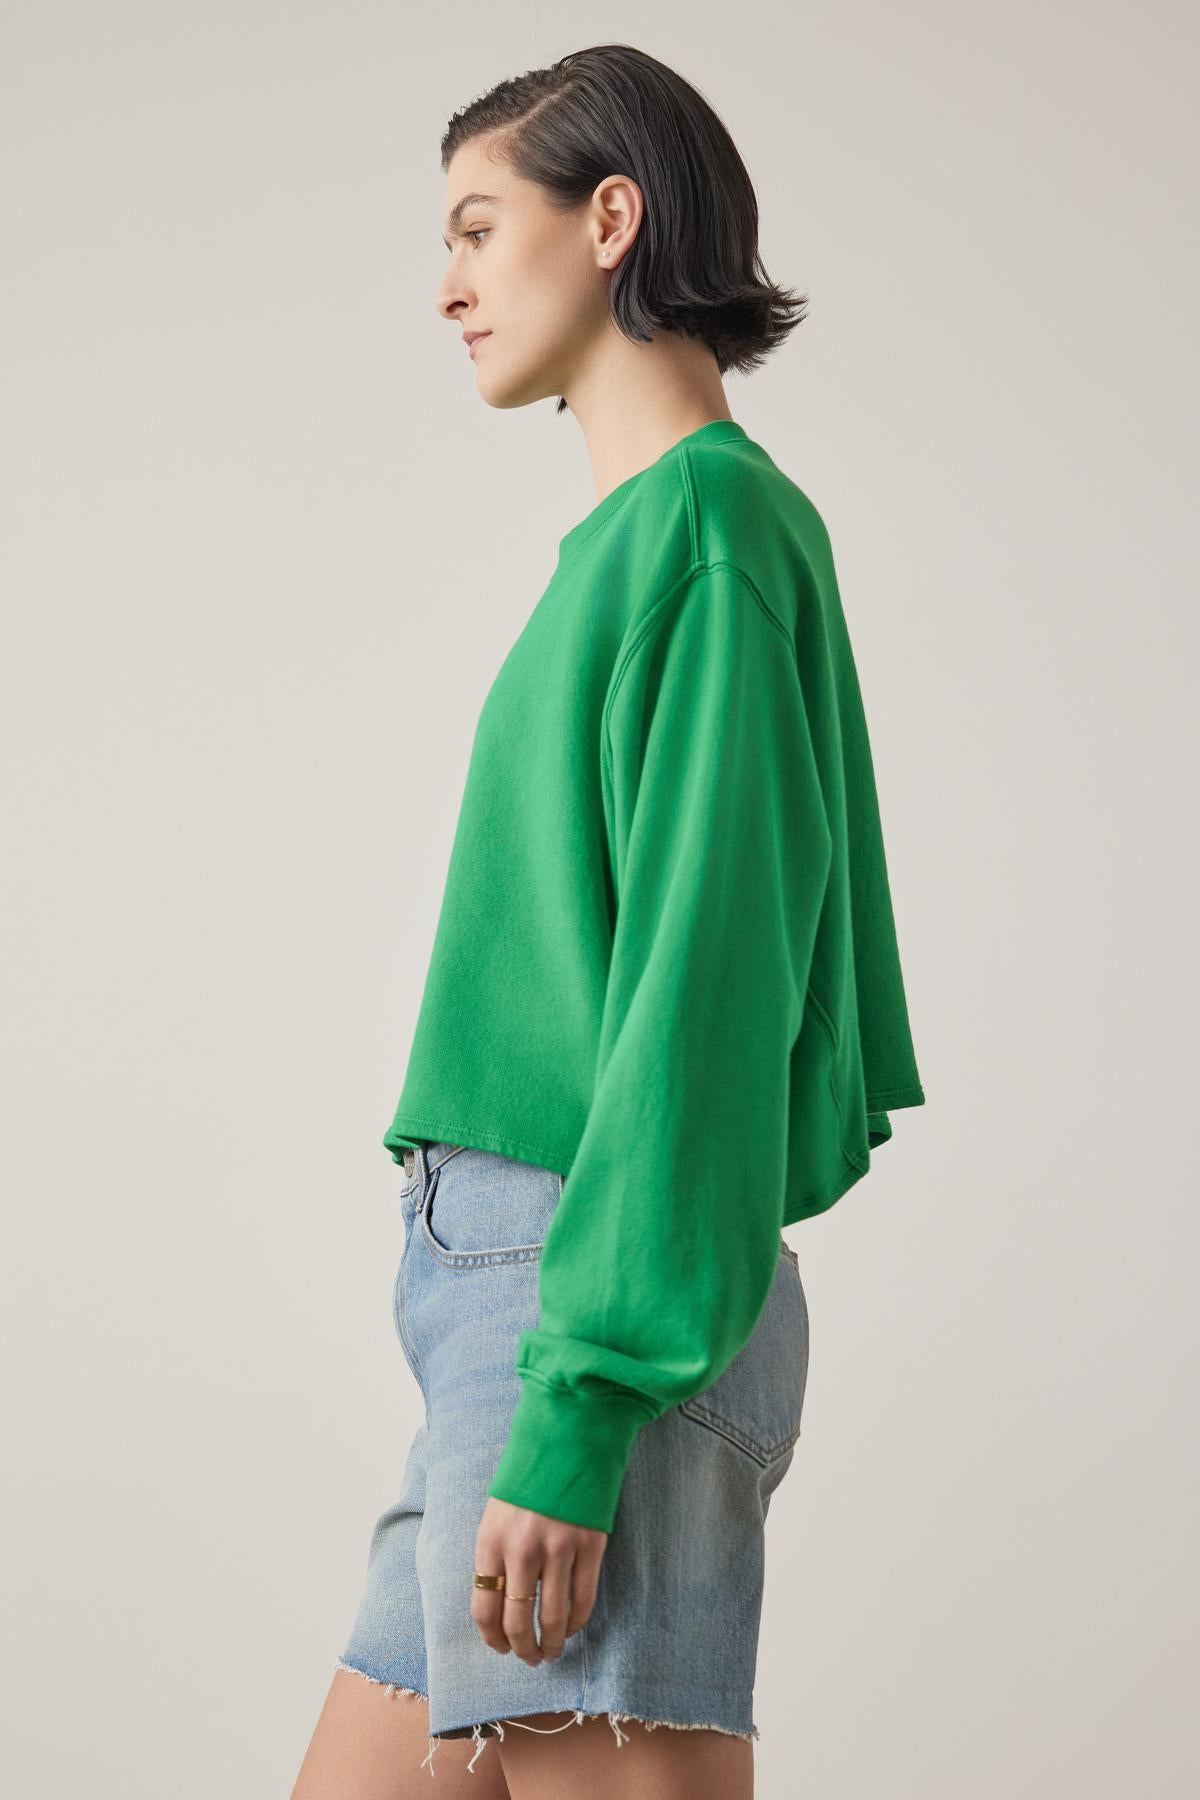   A young woman in a vibrant green Velvet by Jenny Graham Malibu sweatshirt and blue denim shorts stands in profile against a neutral background. 